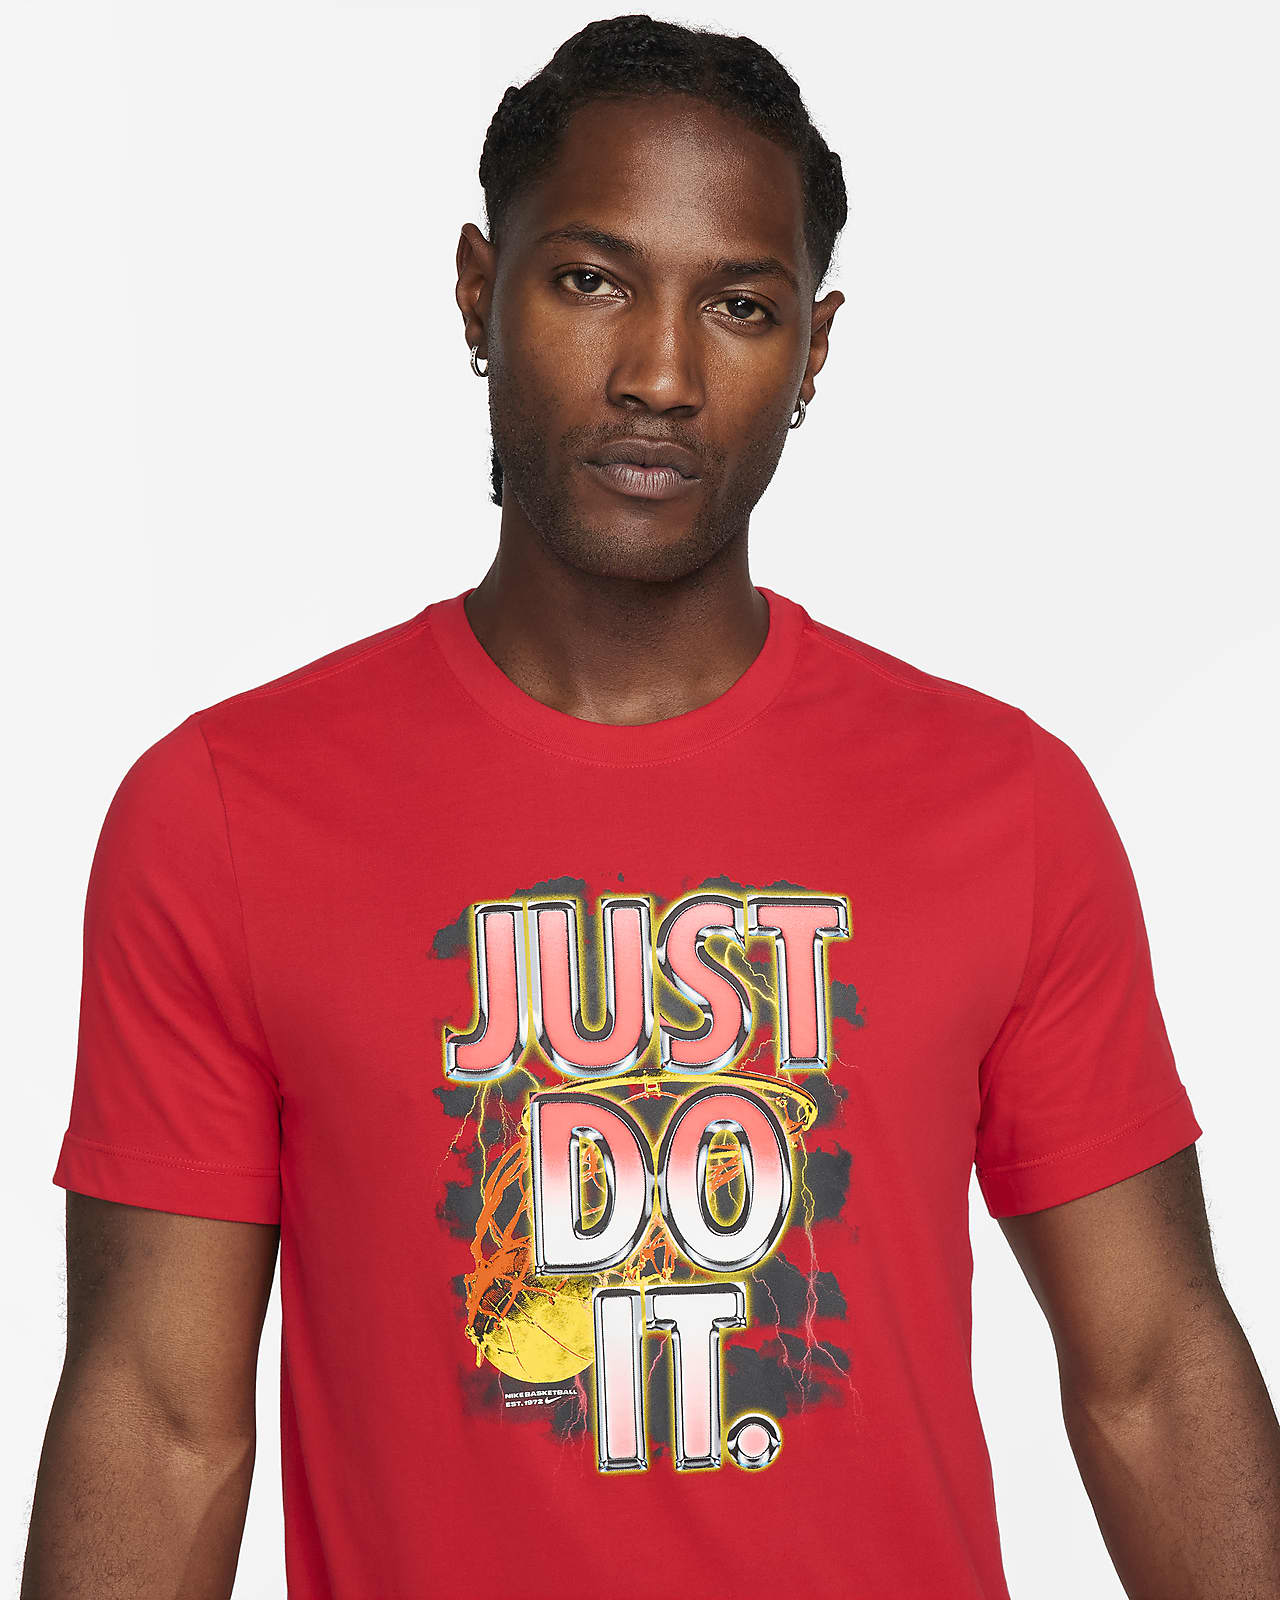 Nike Men's Dri-fit Just Do It Graphic T-shirt In Black